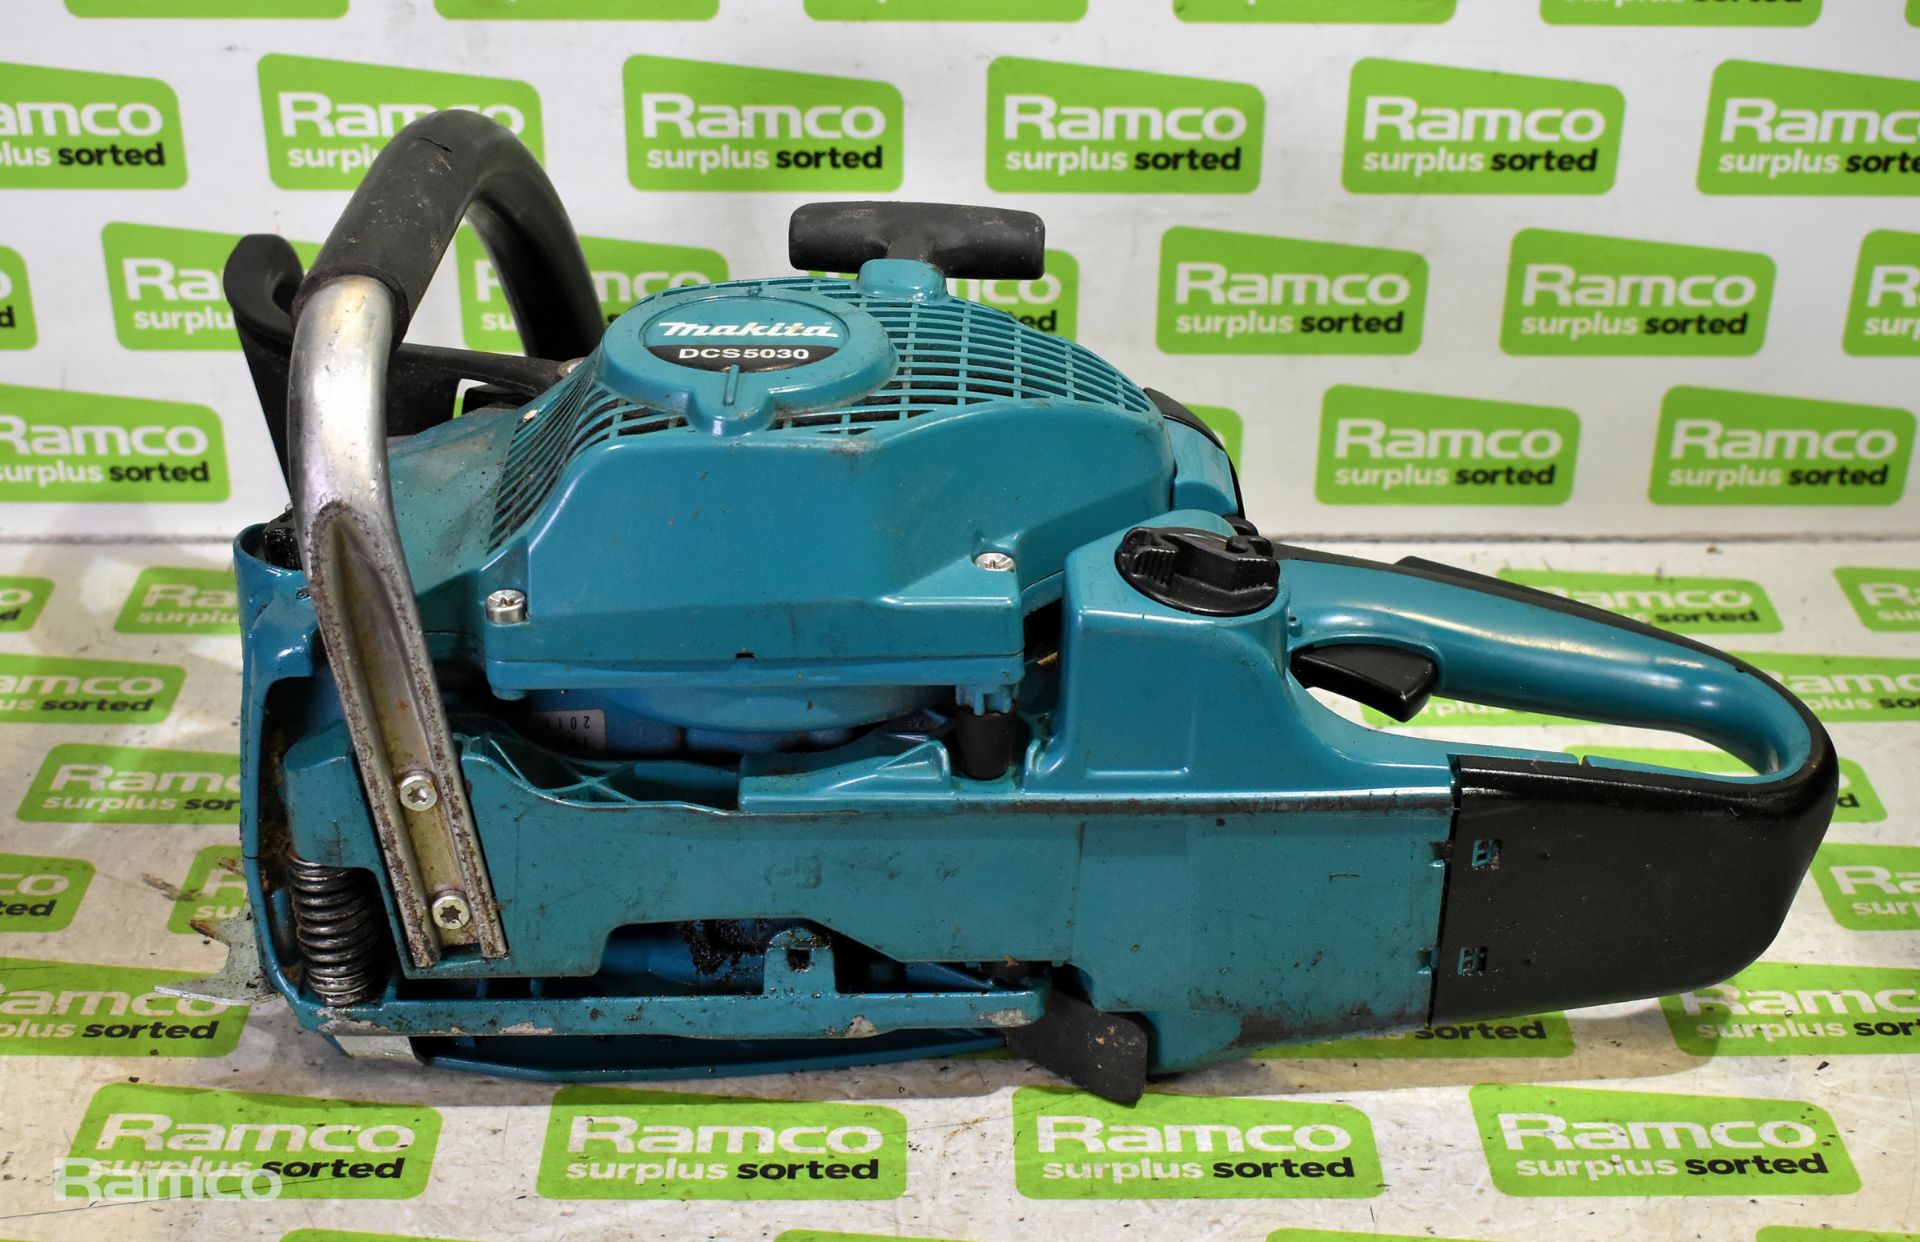 4x Makita DCS5030 50cc petrol chainsaws - BODIES ONLY - AS SPARES OR REPAIRS - Image 6 of 22